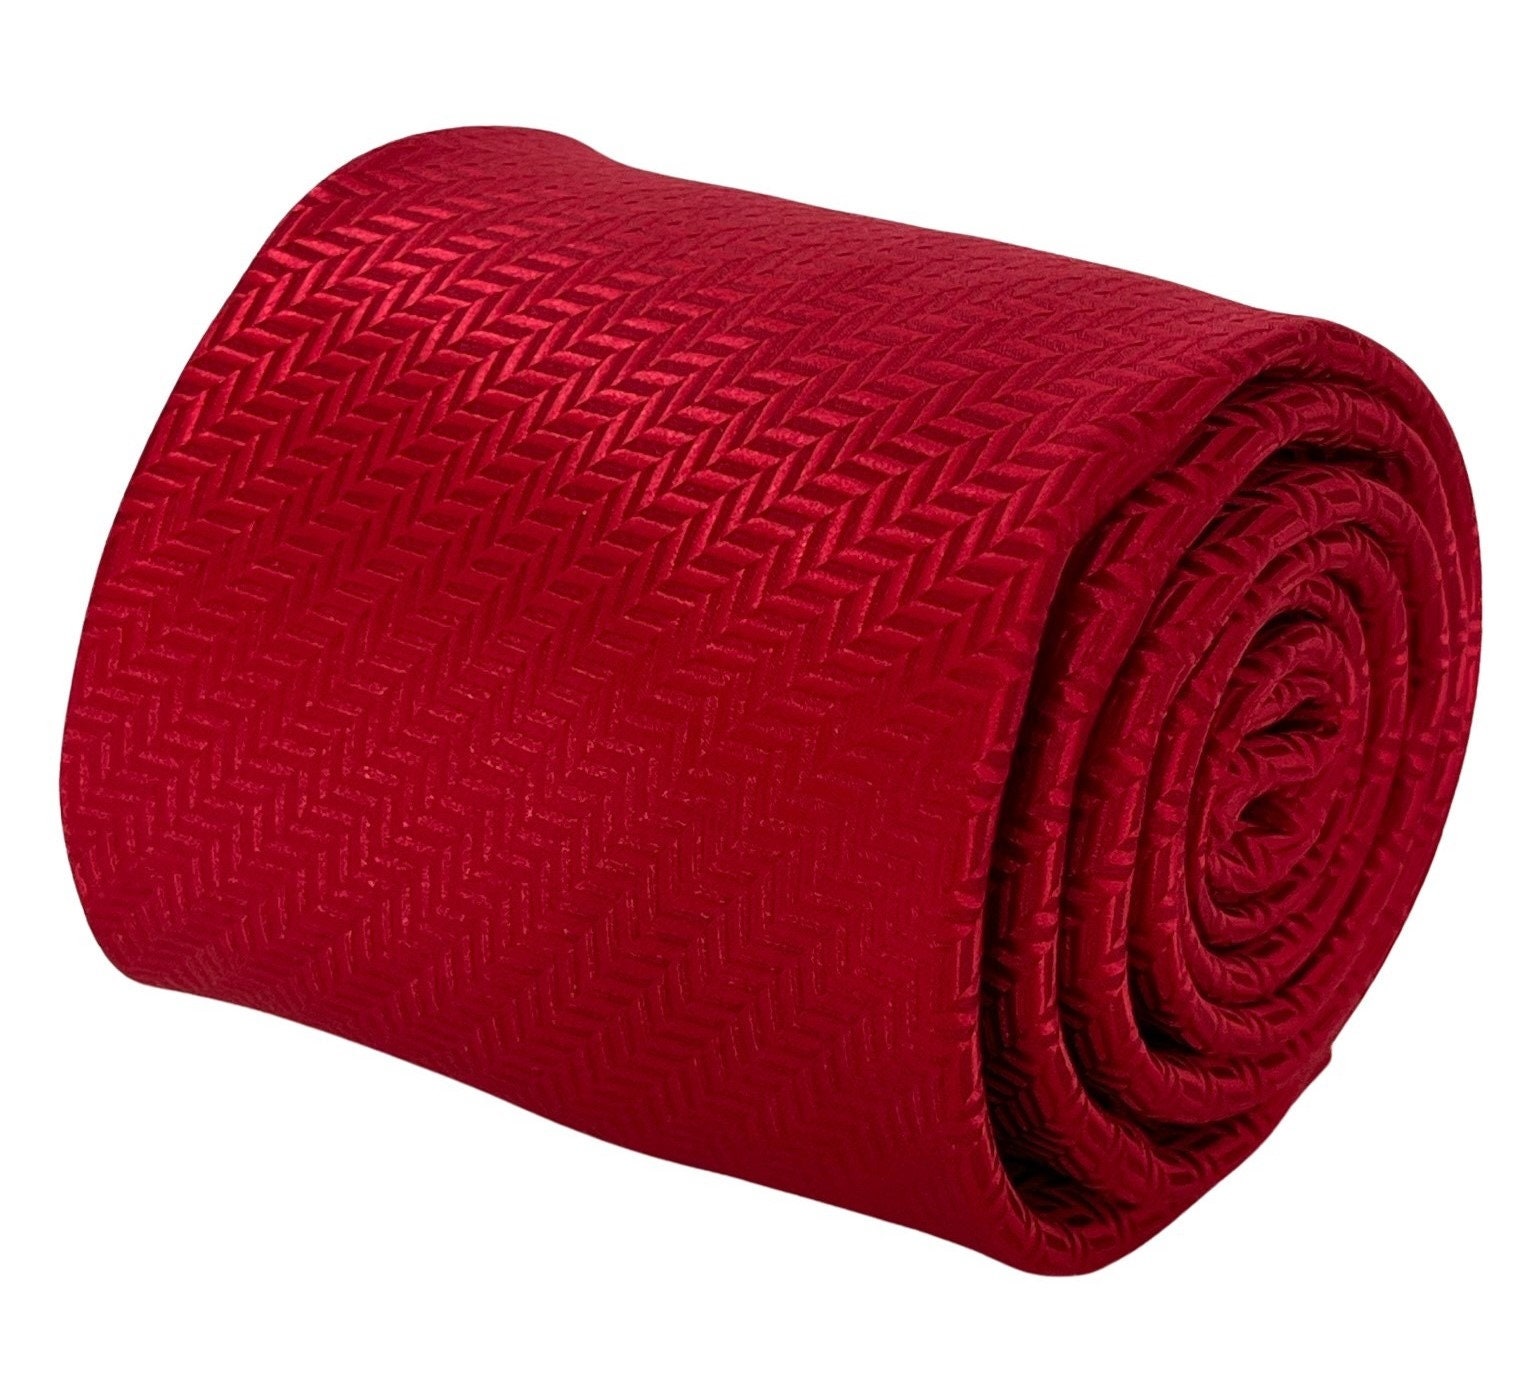 MicroSuede Burnt Red Tie Traditional